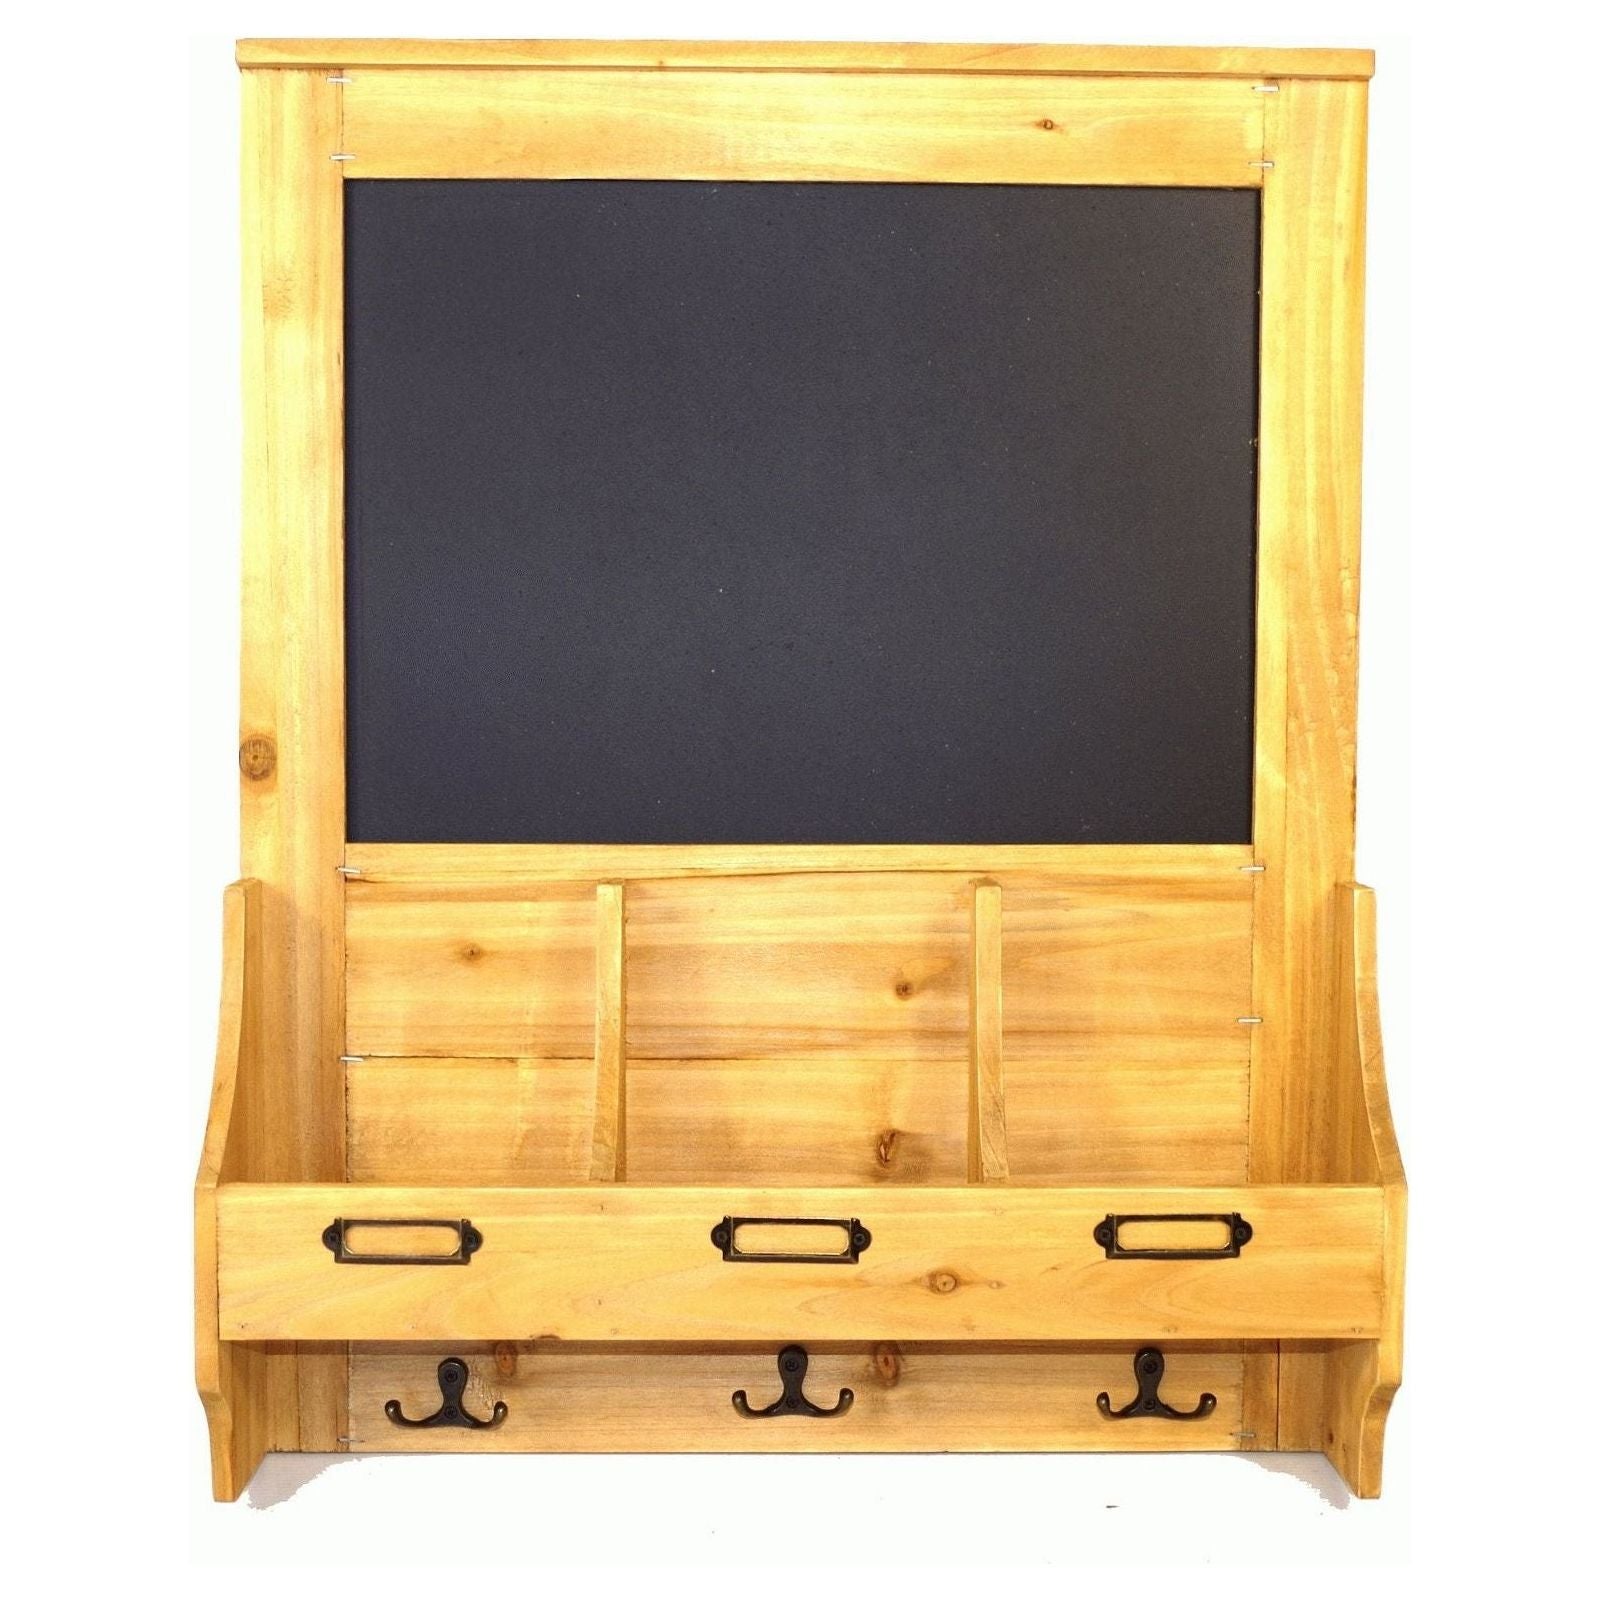 Chalkboard with hooks and Post Space 47 x 10 x 59cm - Ashton and Finch